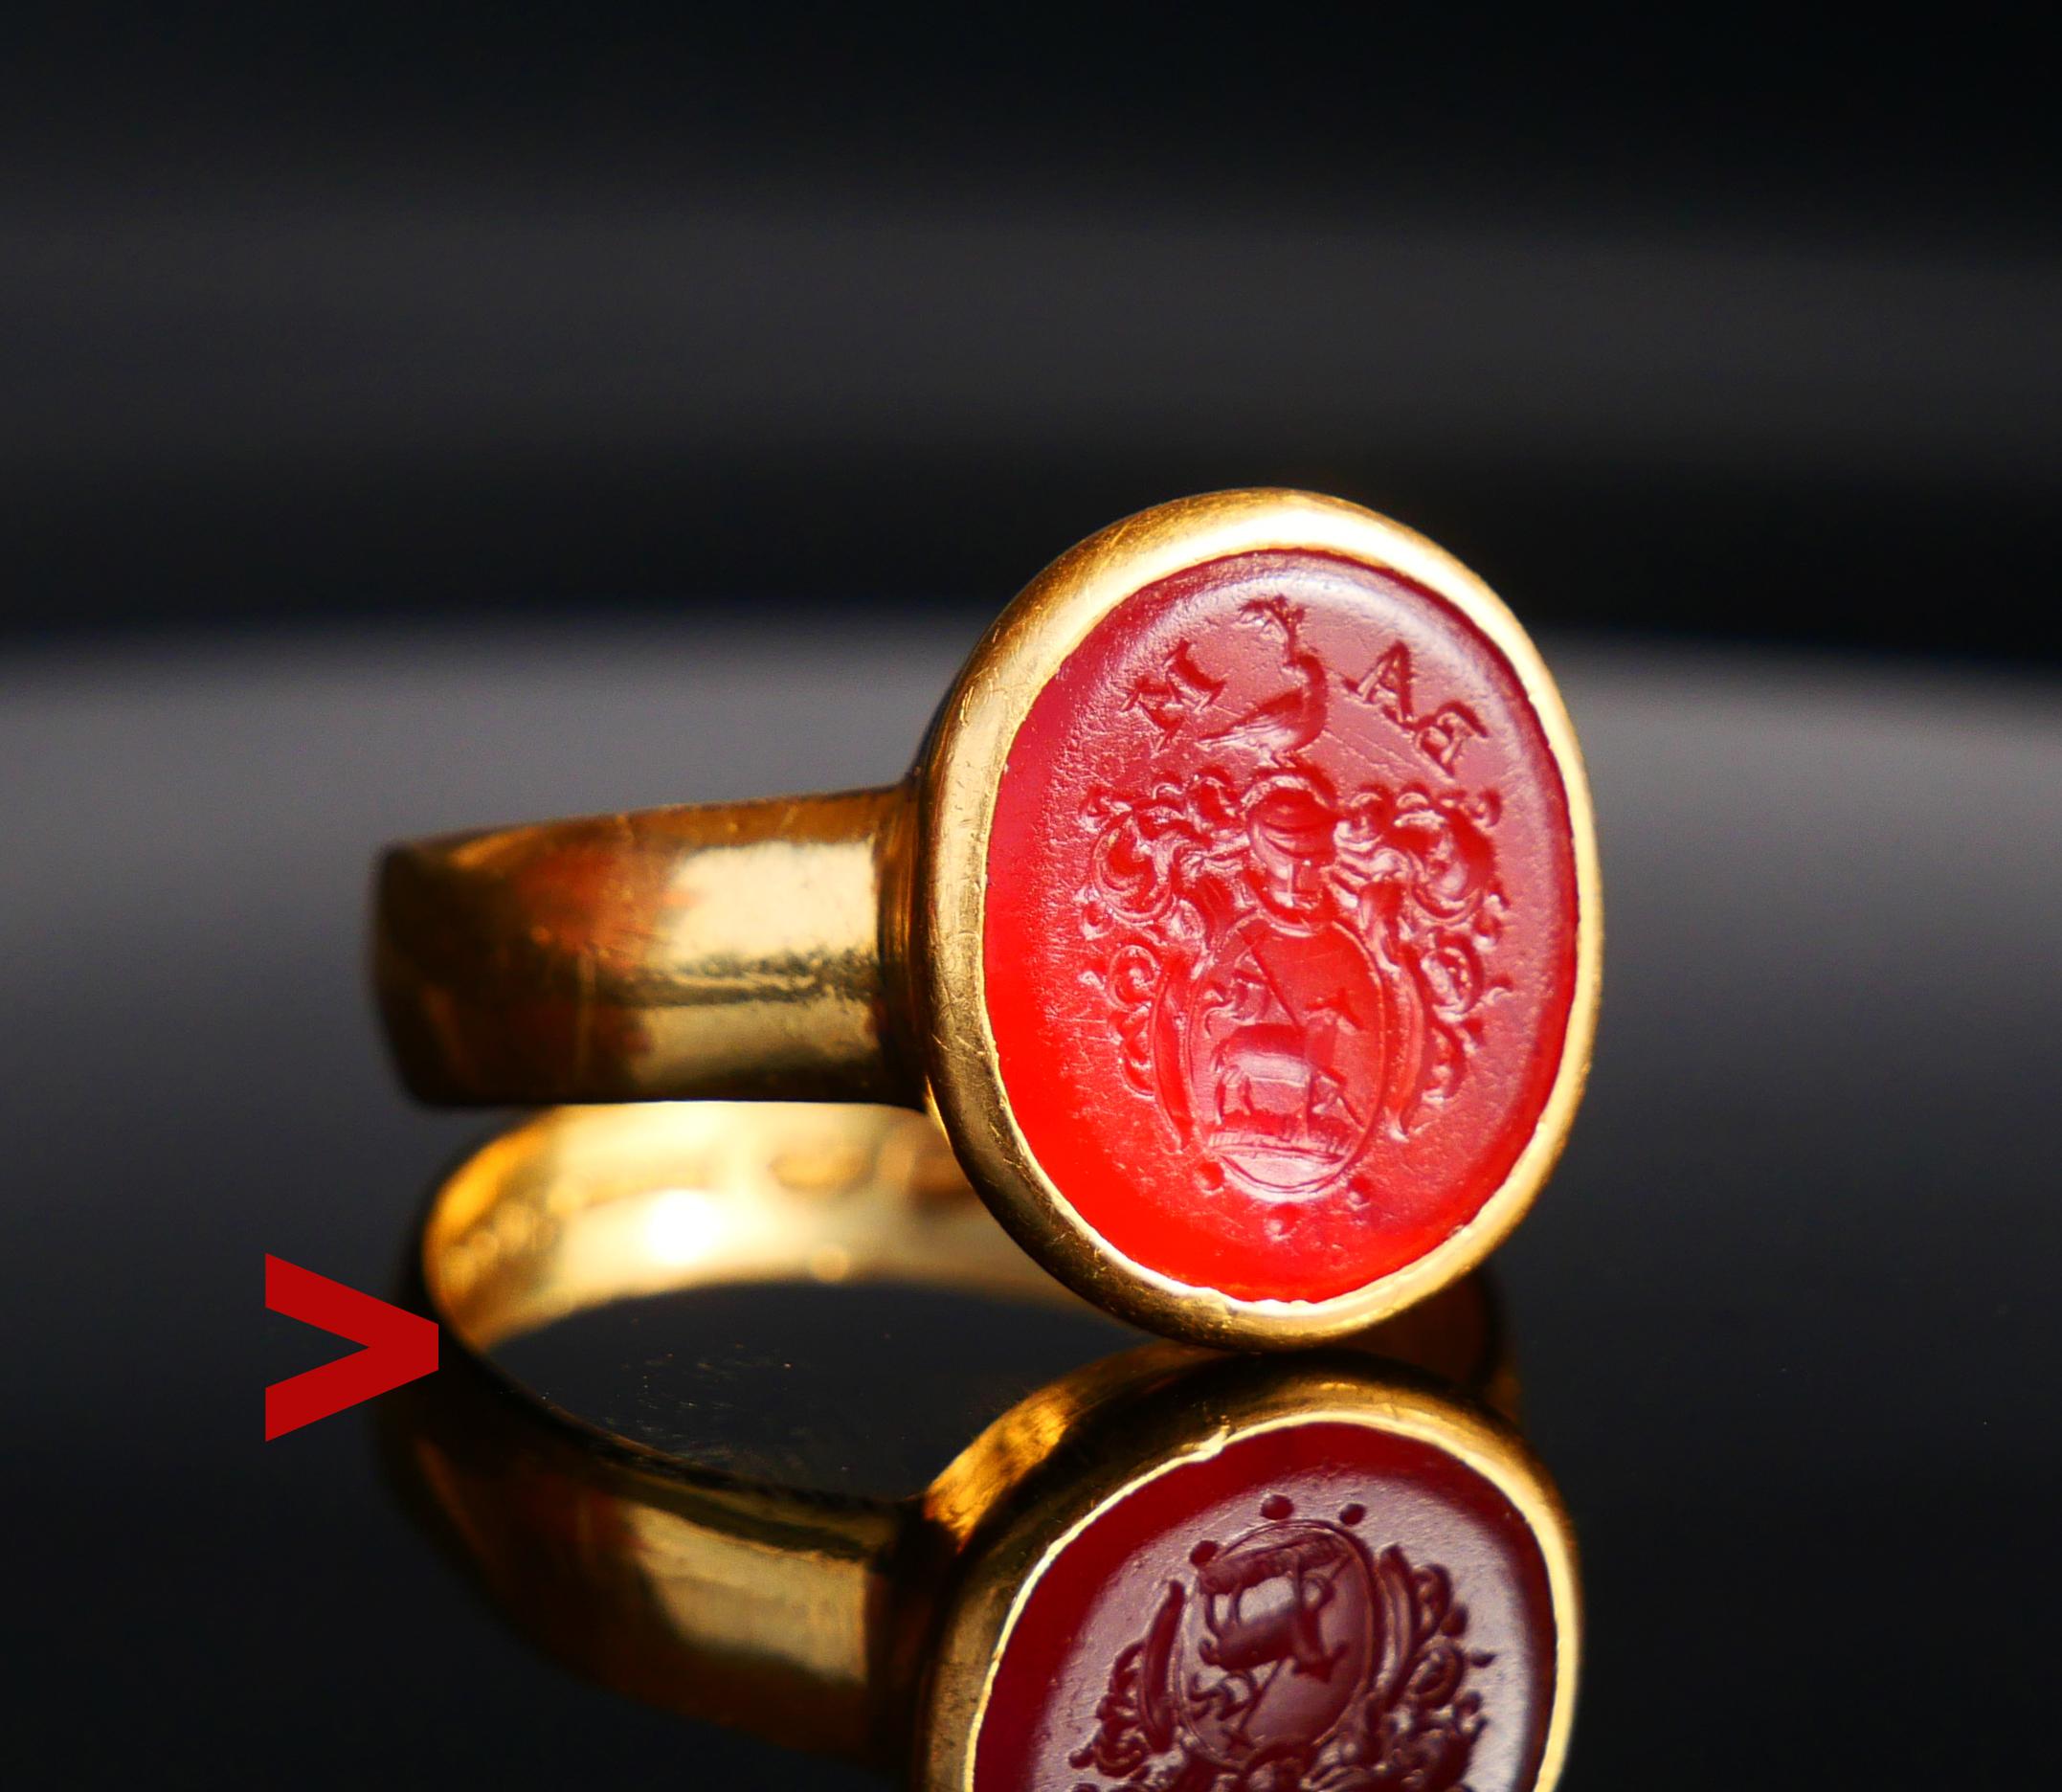 Great Signet Ring with Coats of Arms of Christ Intaglio set in solid 23K Gold.

Agnus Dei with the vexillum on the shield and 3 dots / trinity symbol bellow.

Knight's Armor and Helmet with plumage. On top - Ararat Dove holding a branch with leaves.